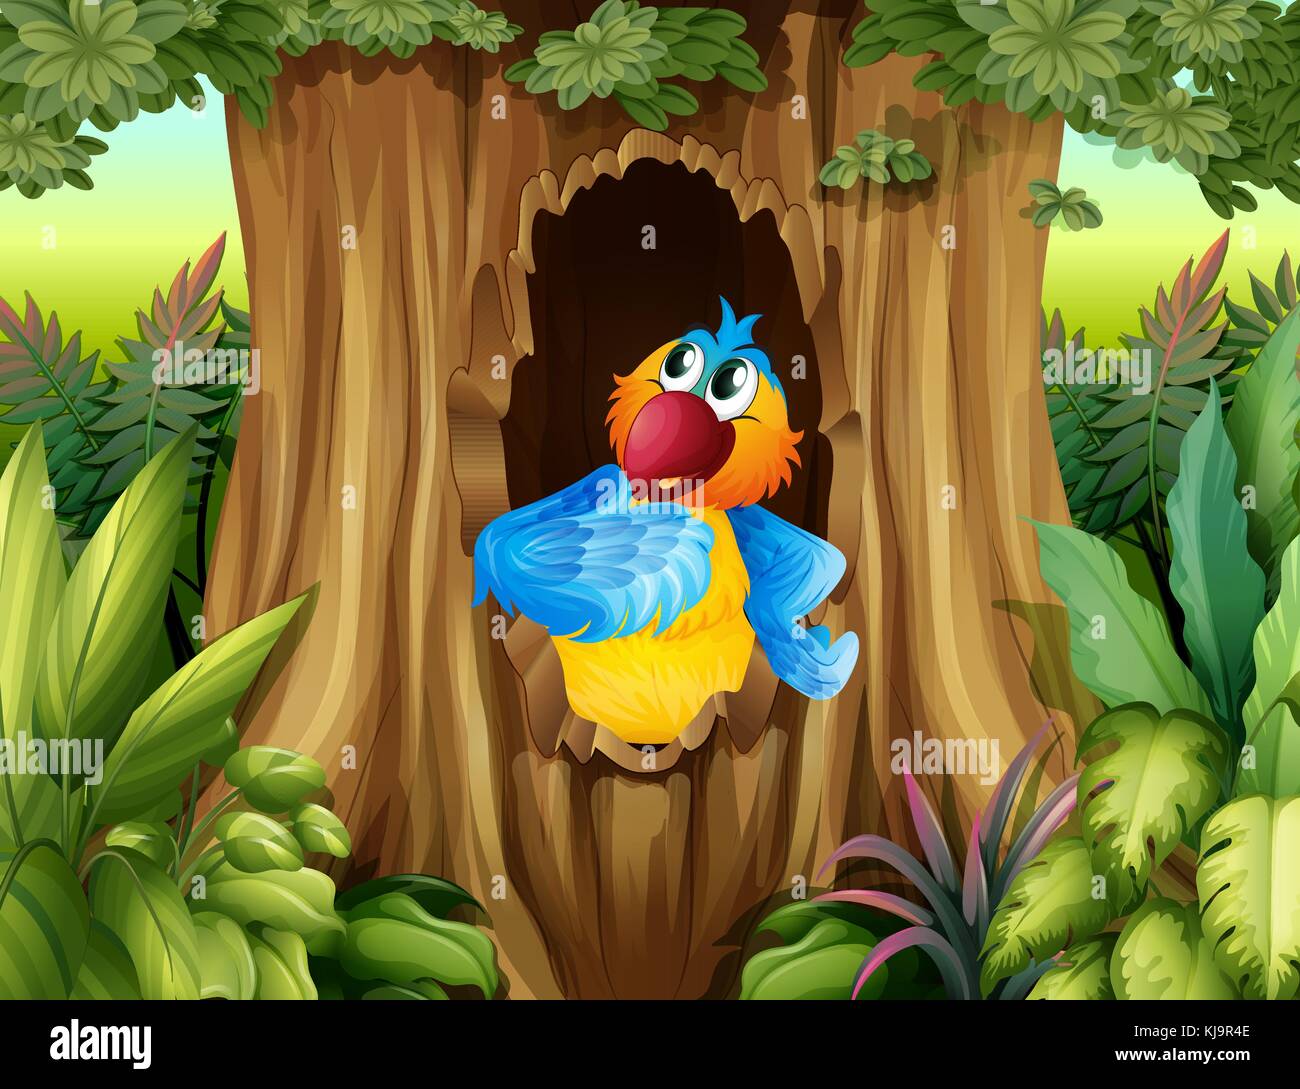 Illustration of a parrot inside a tree hollow Stock Vector